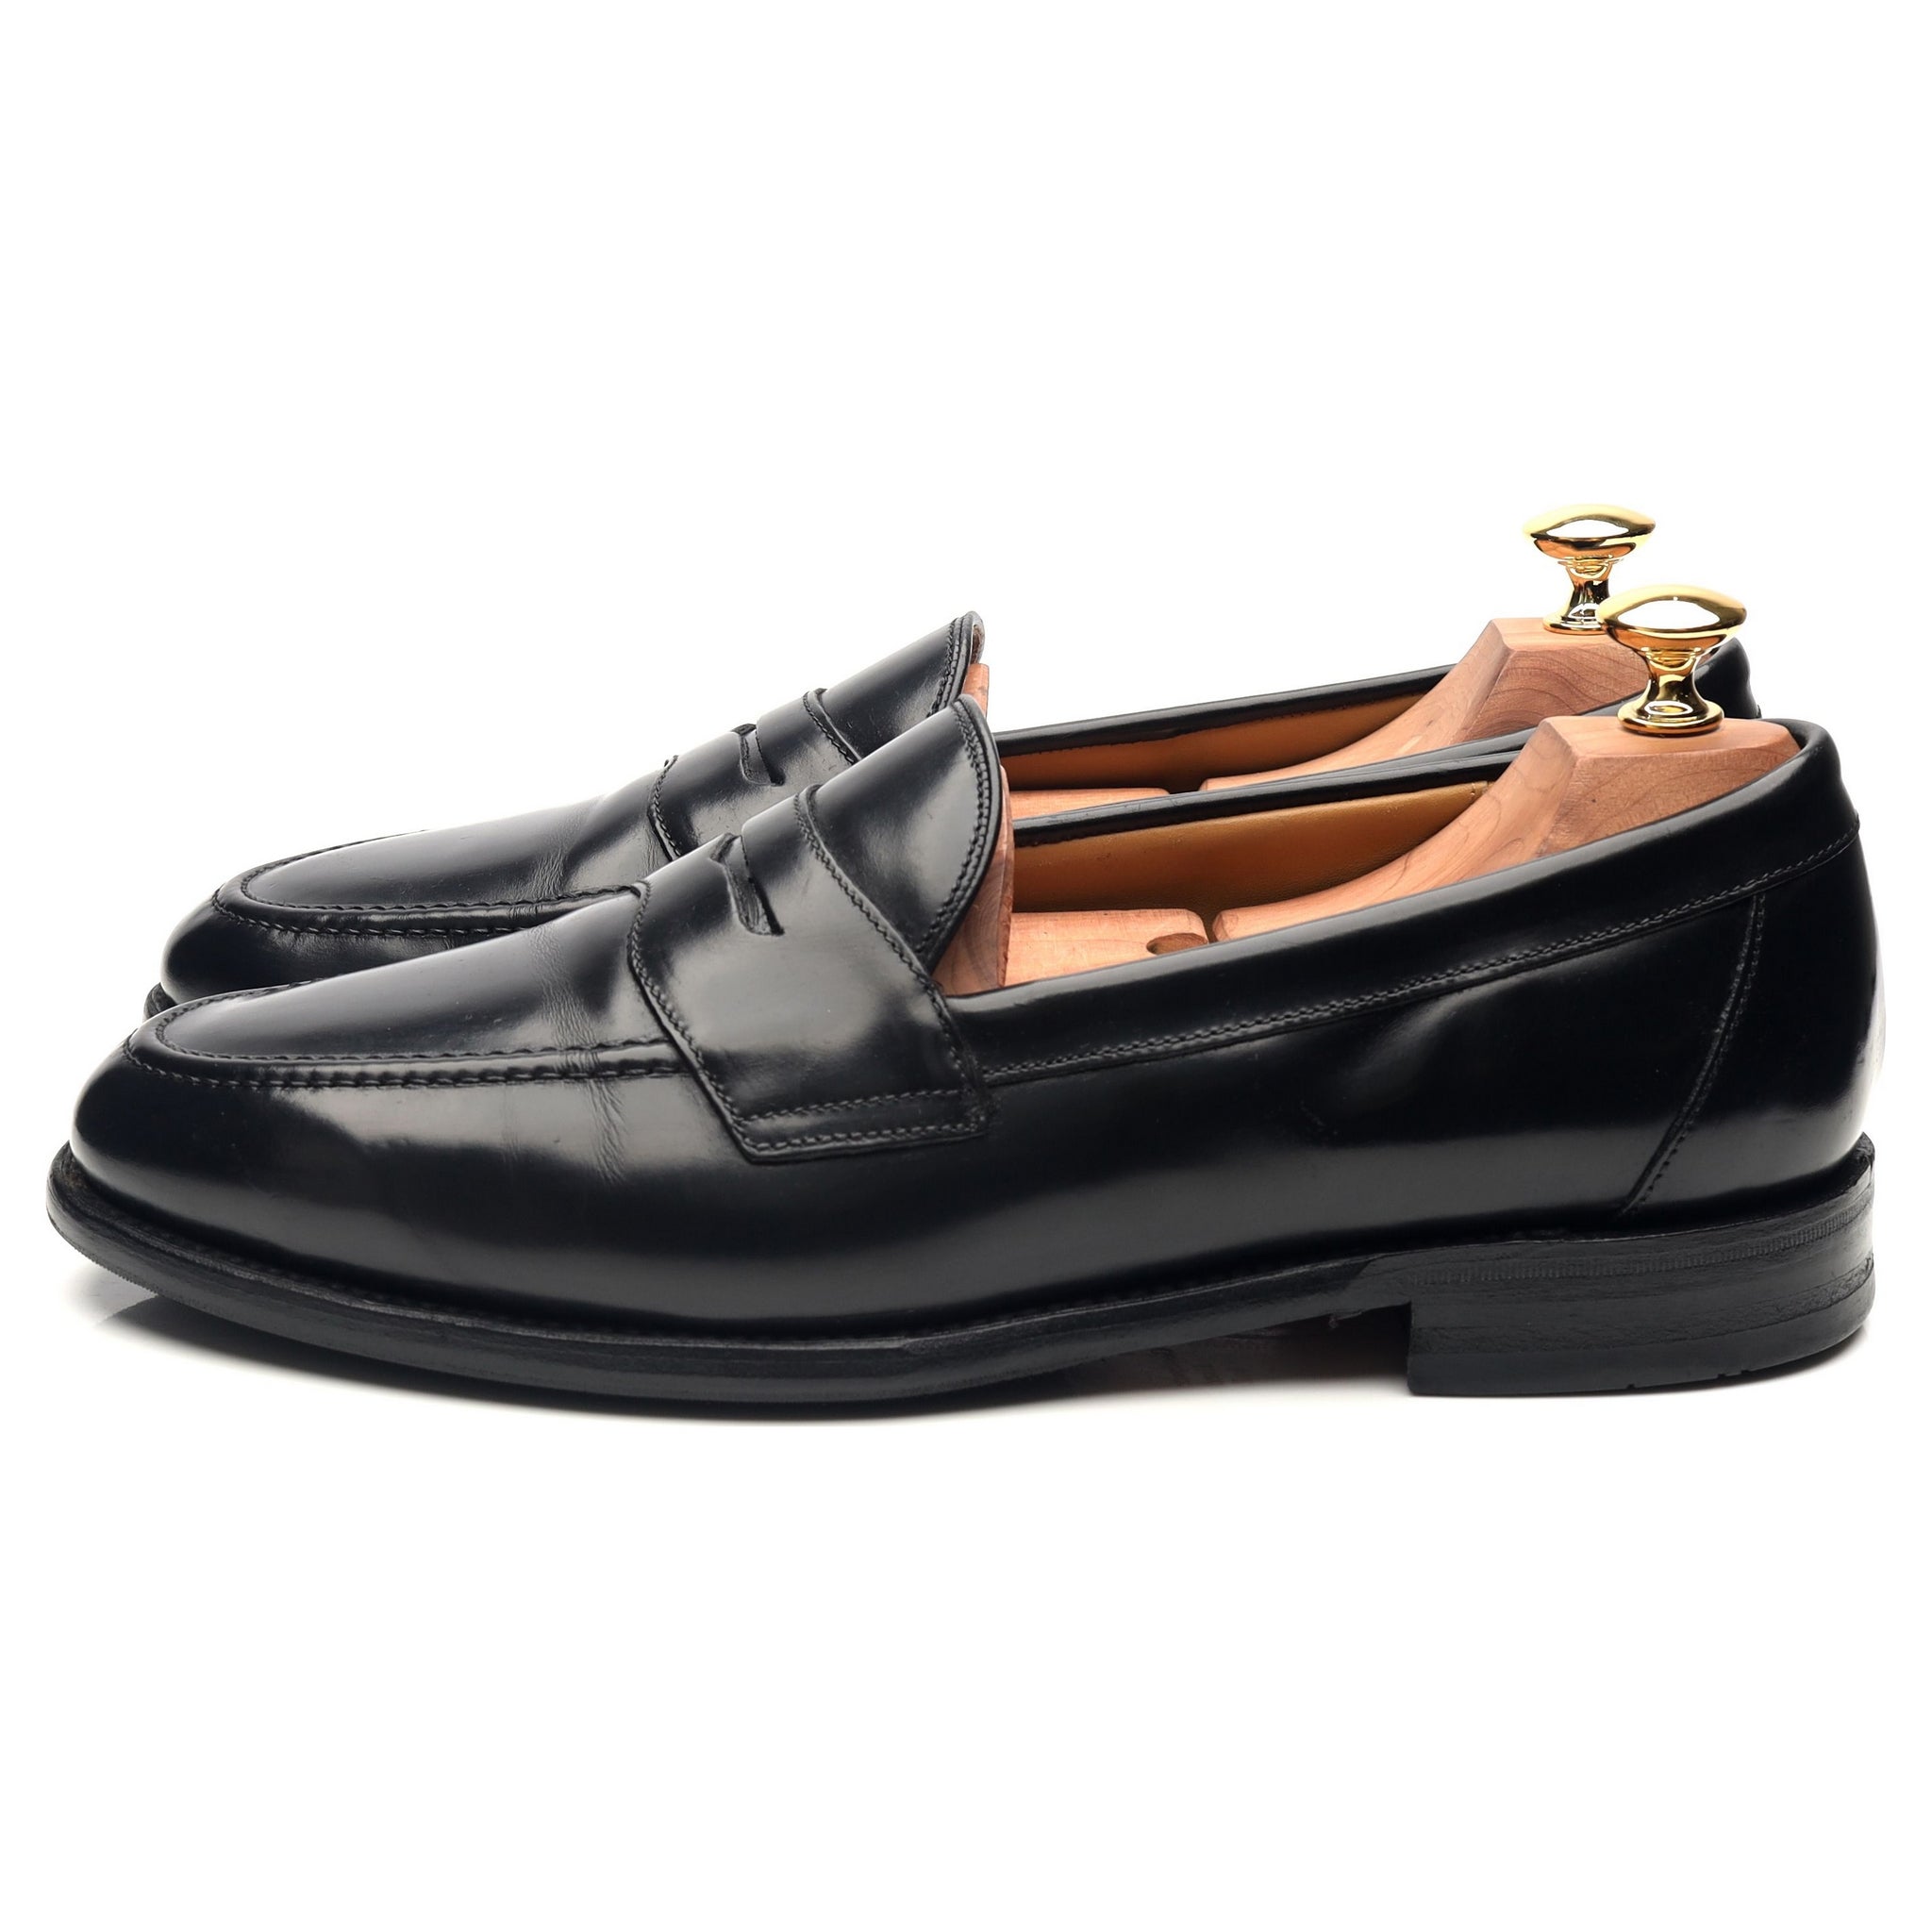 Dam Triumferende rookie Eton' Black Leather Loafers UK 9 F - Abbot's Shoes